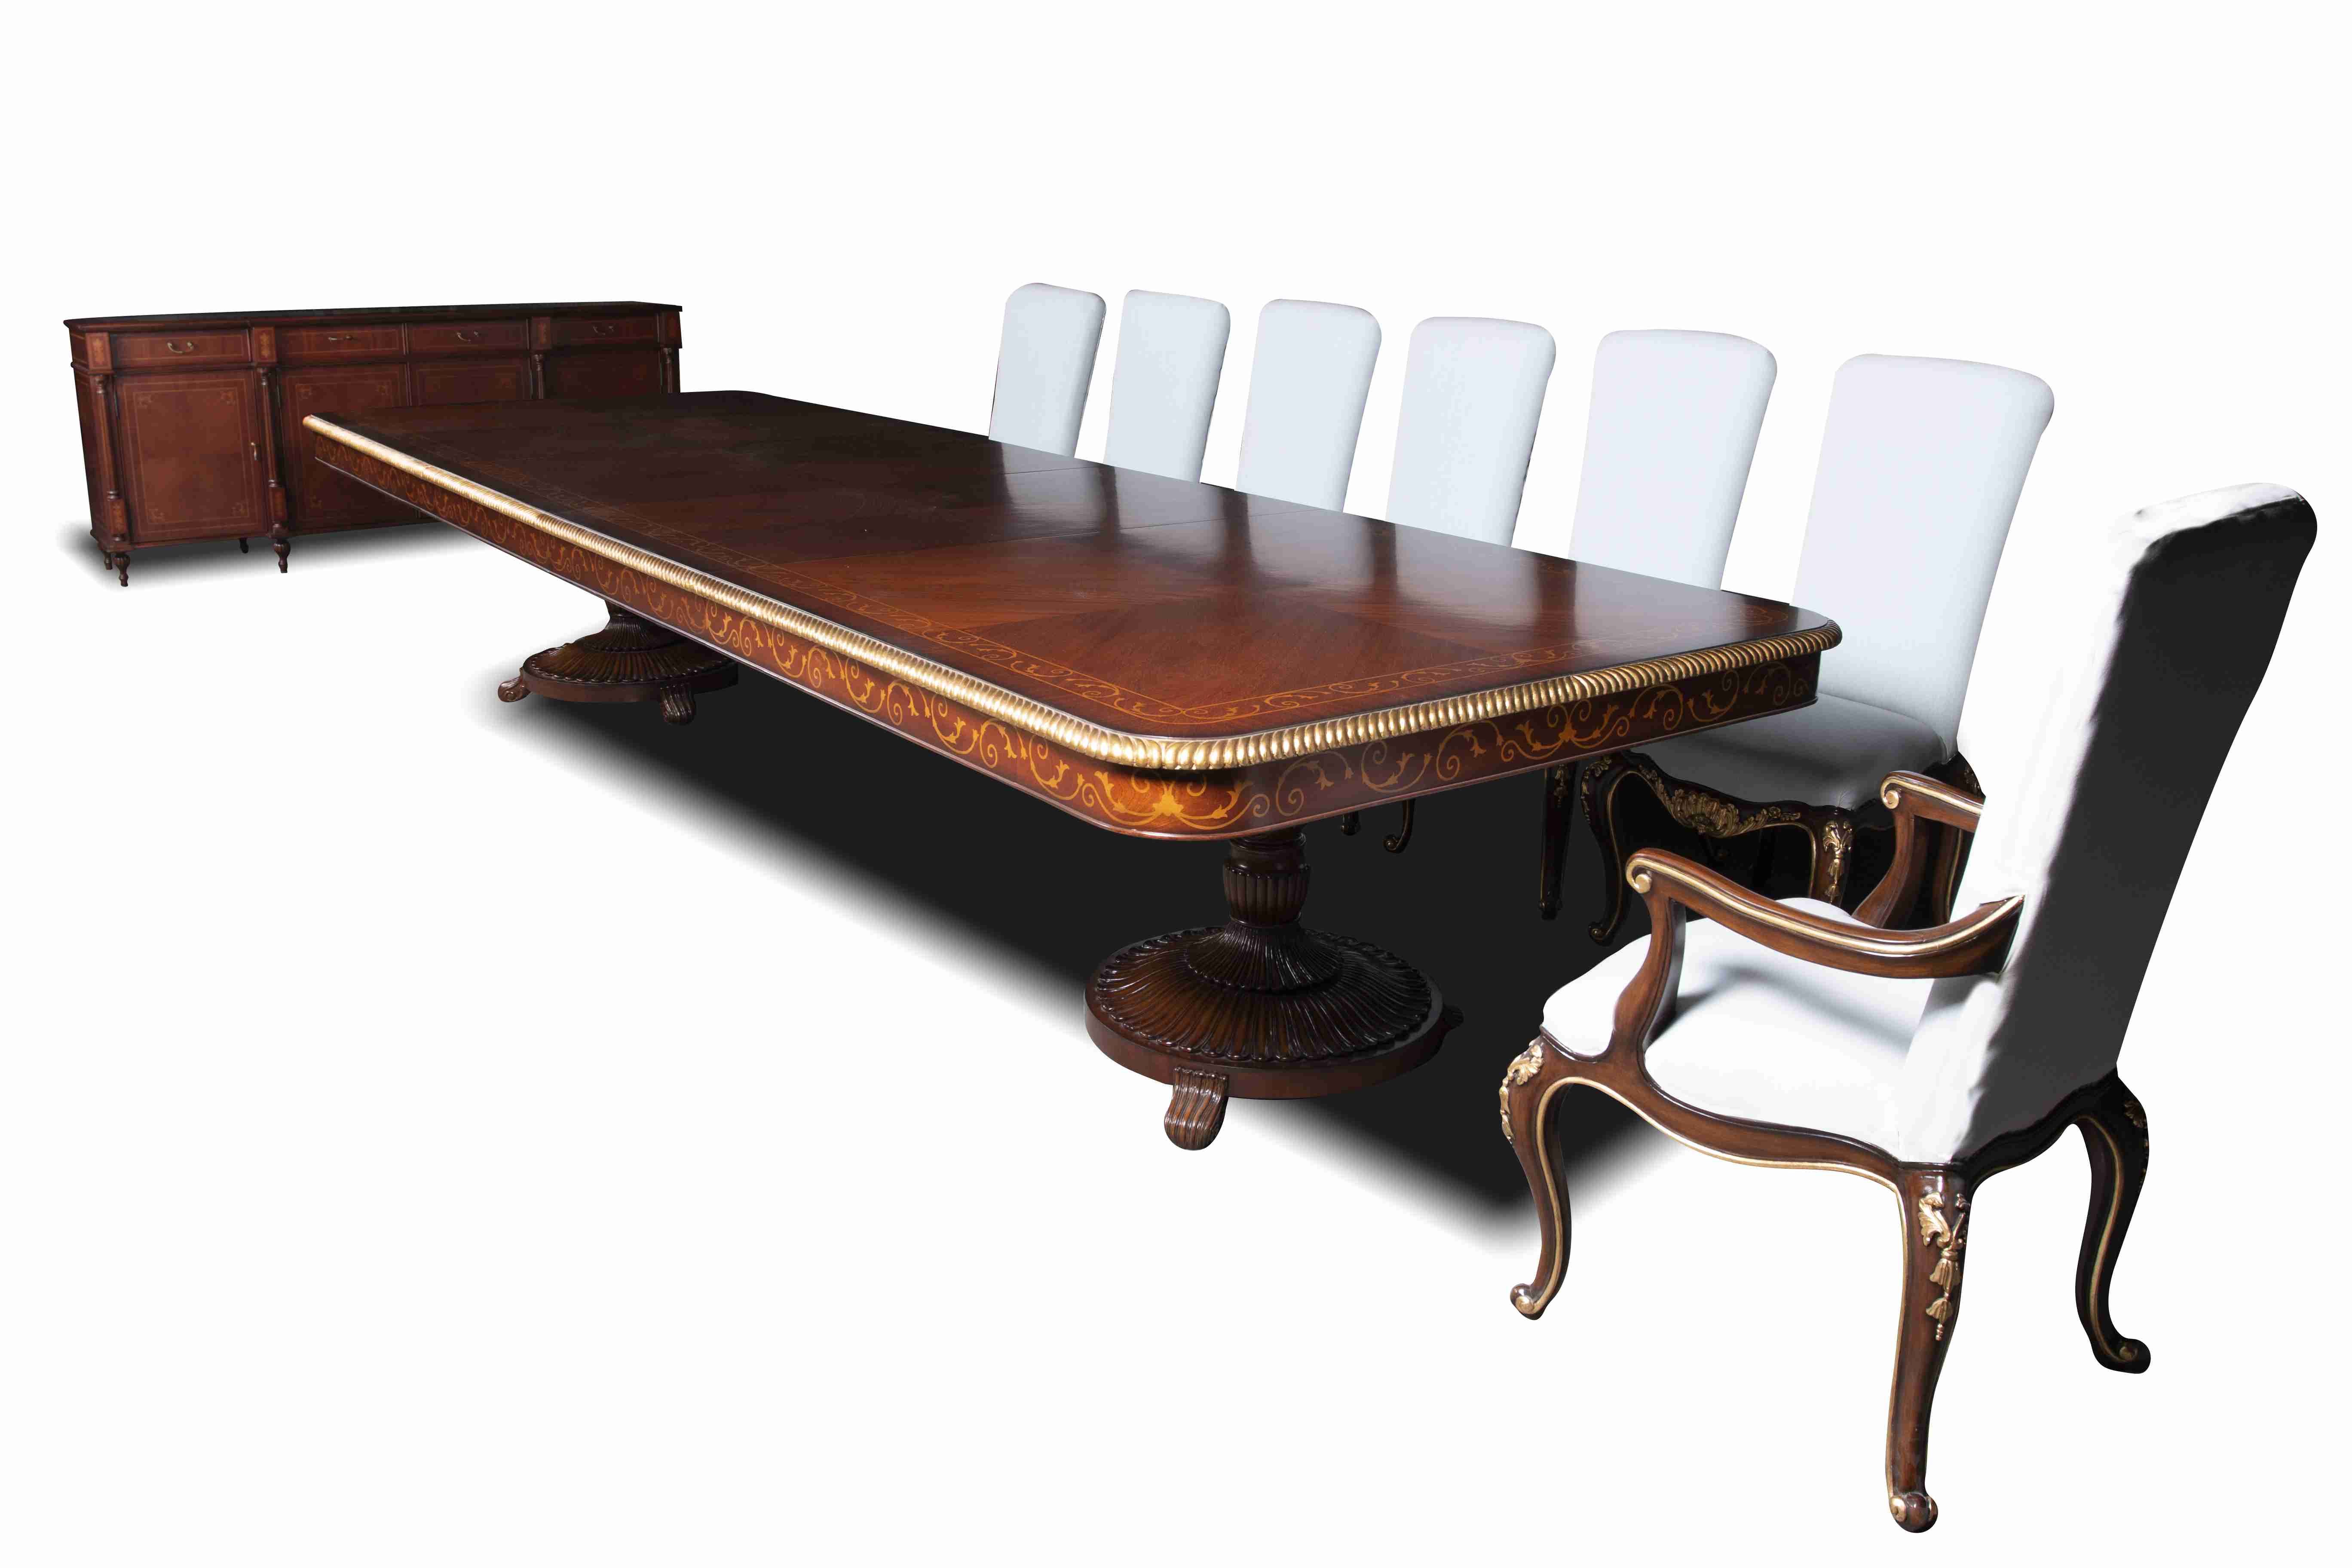 FOUR METER DINING TABLE